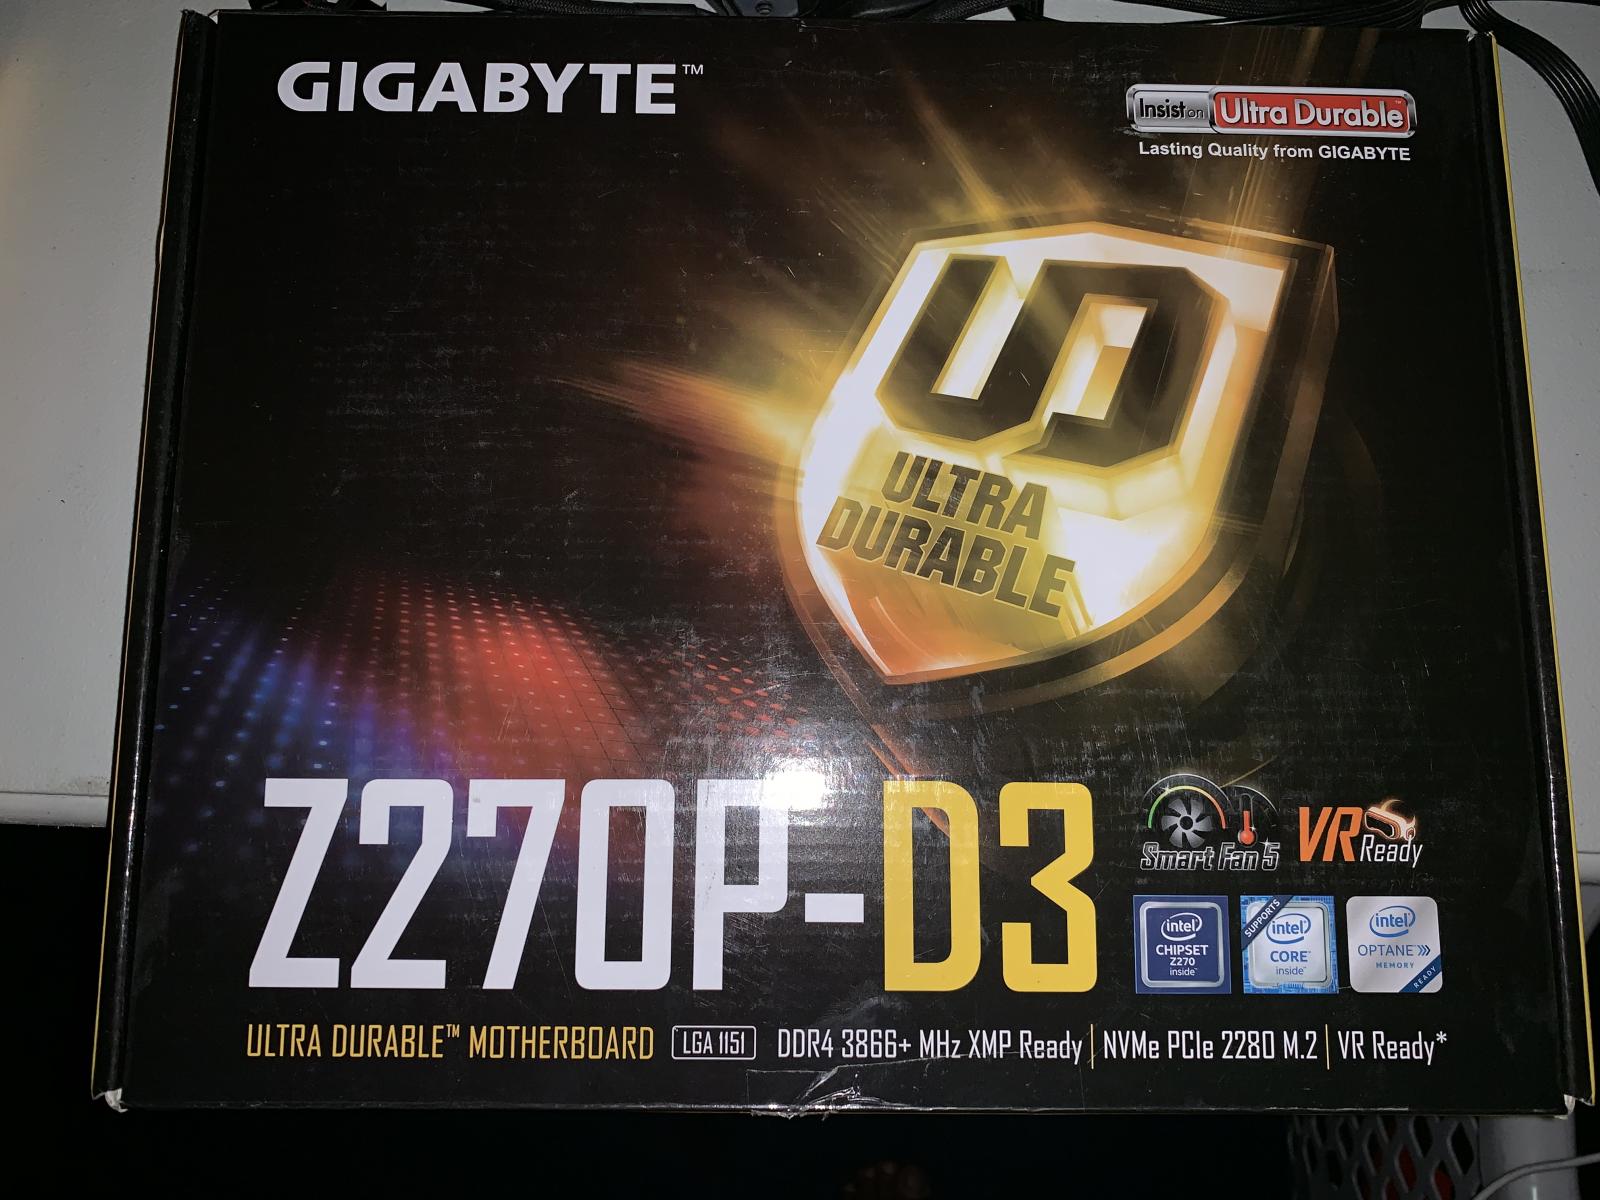 For sale Gigibyte z270p-d3 atx motherboard